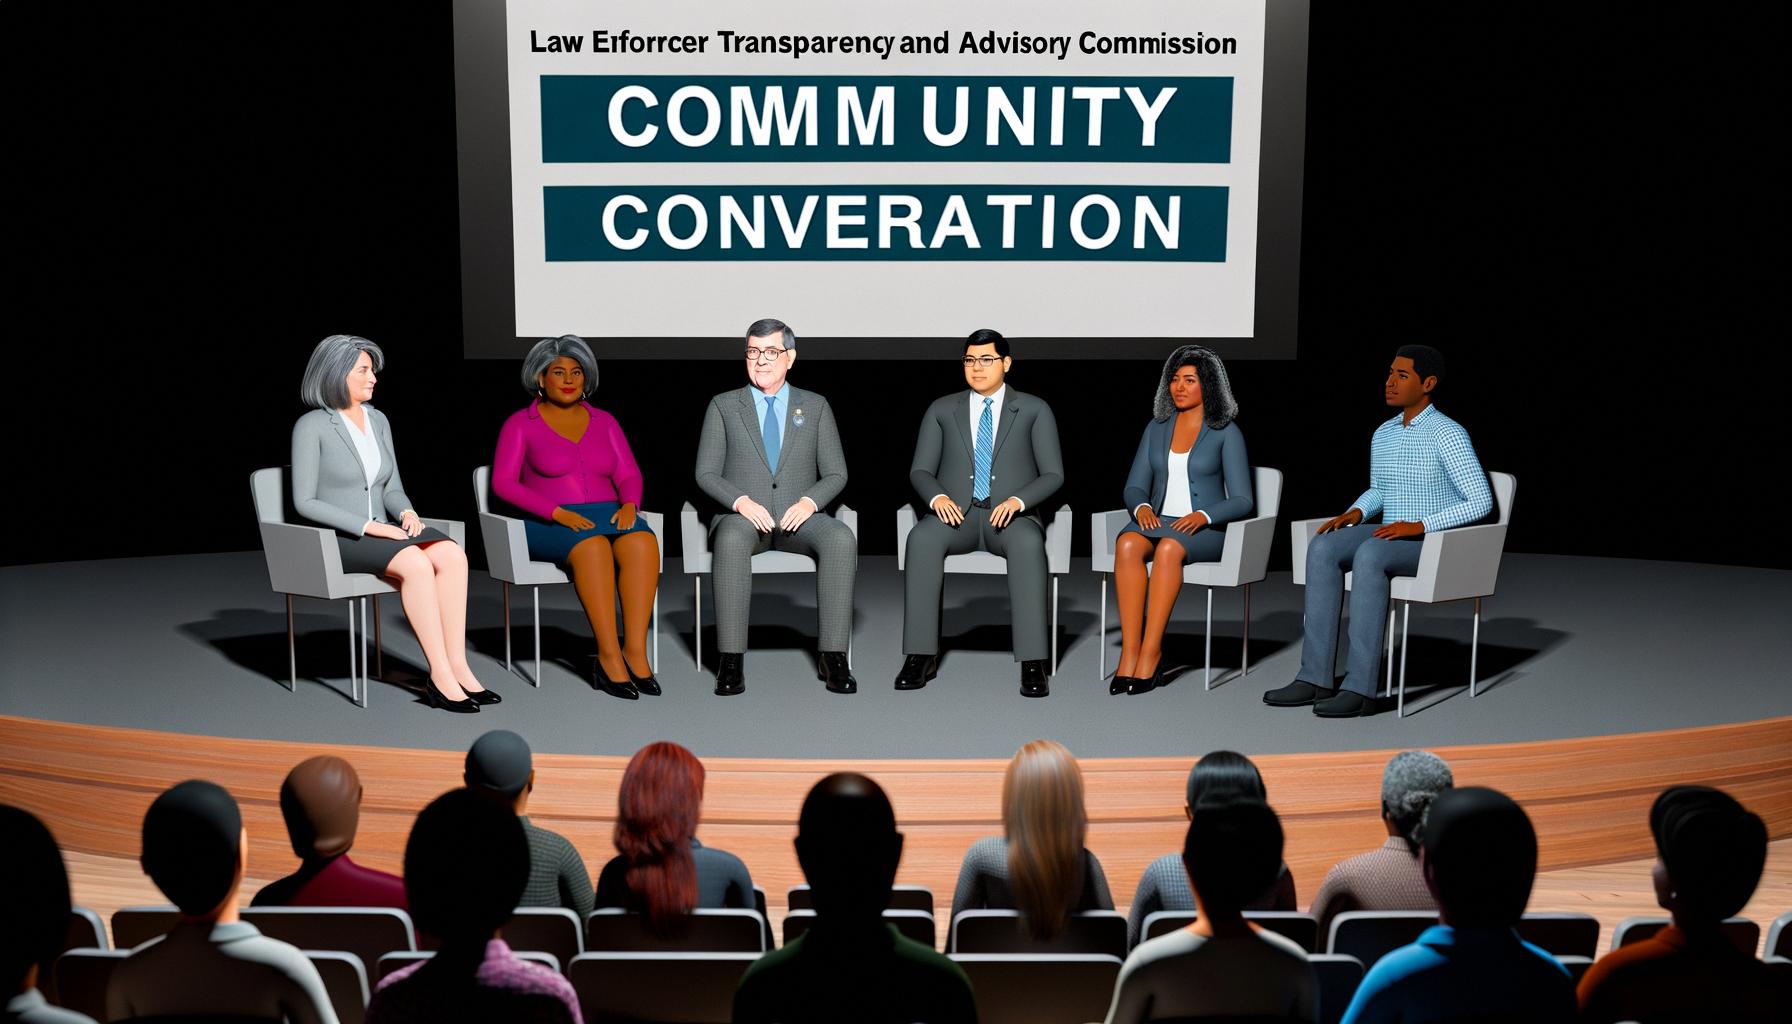 LETAC will host a public forum addressing police transparency and community safety.